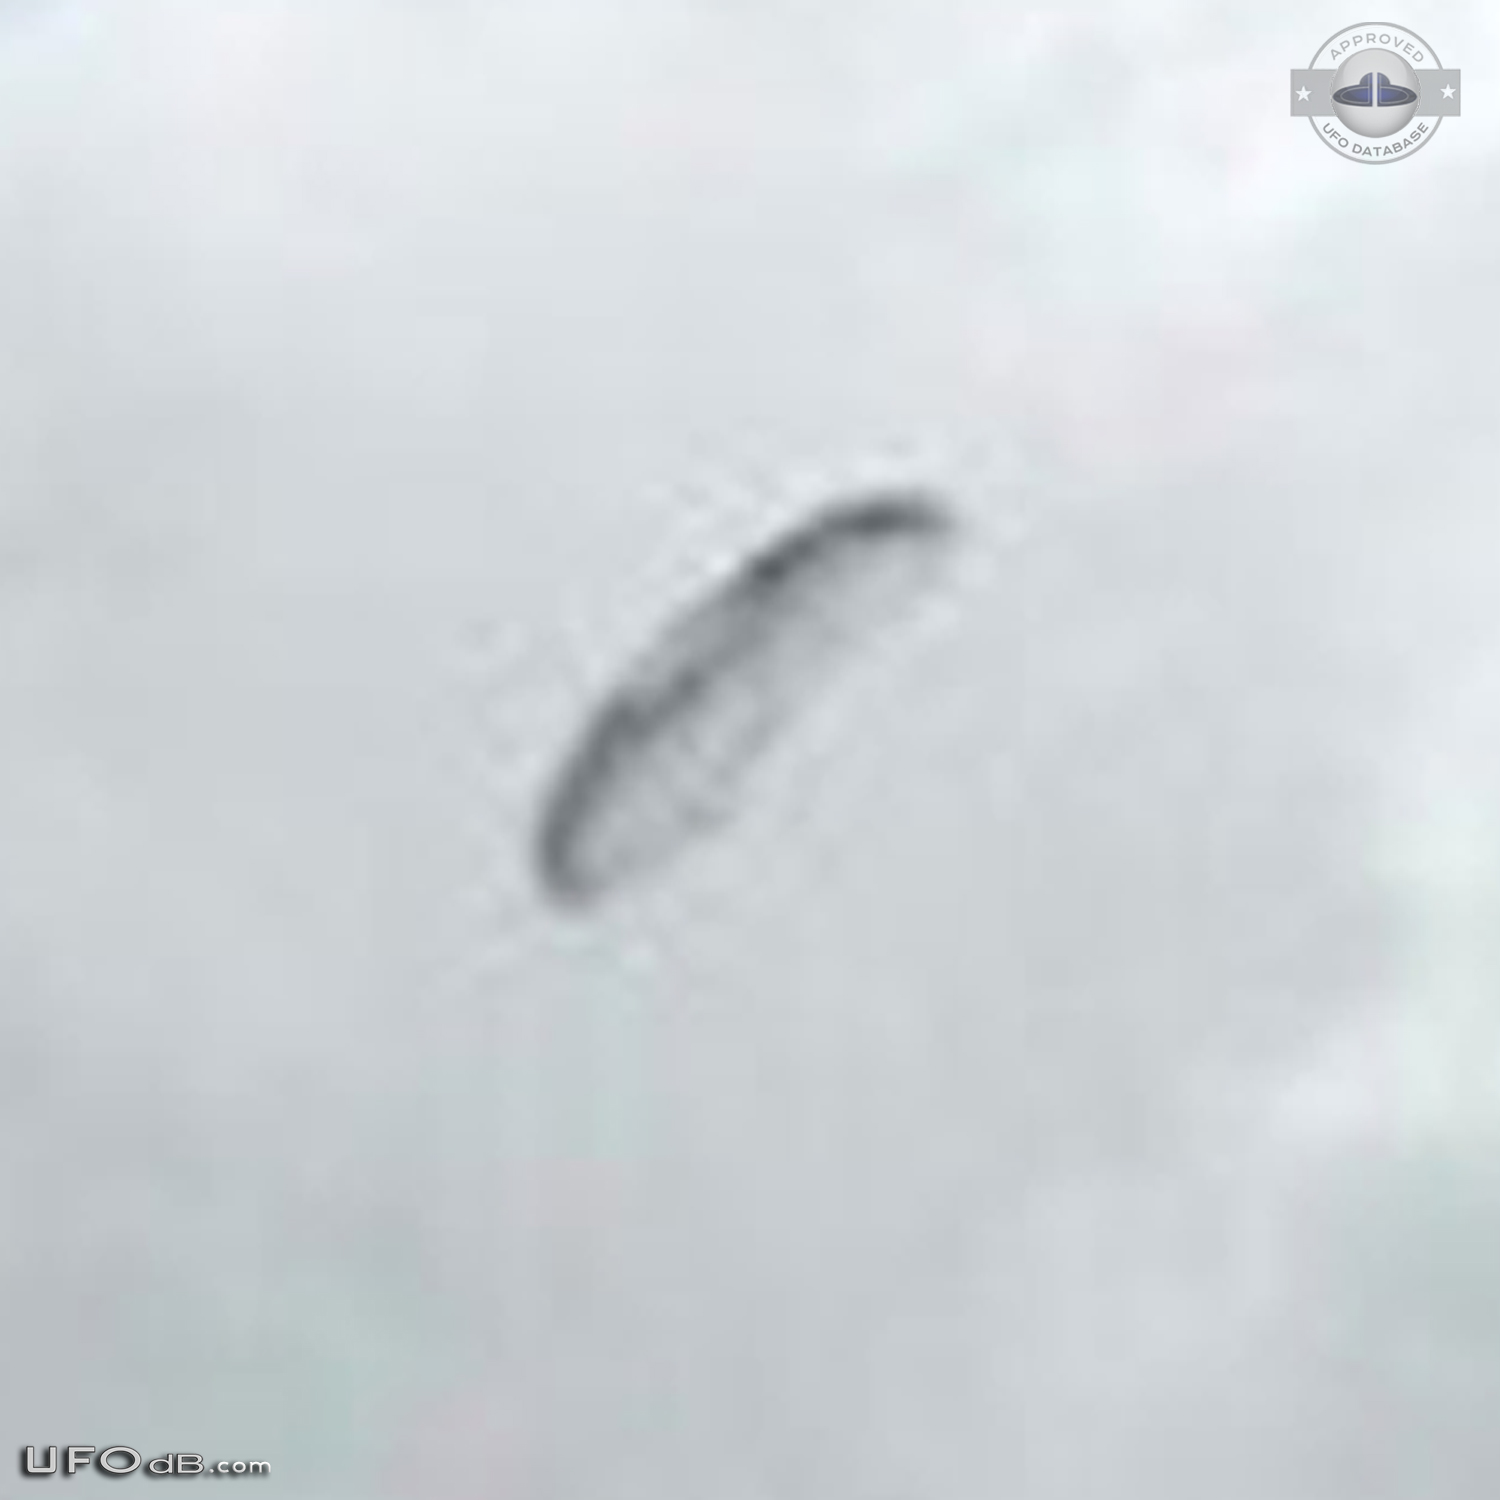 Parachute shaped UFO seen over Claromeco, Tres Arroyos Argentina UFO Picture #620-4